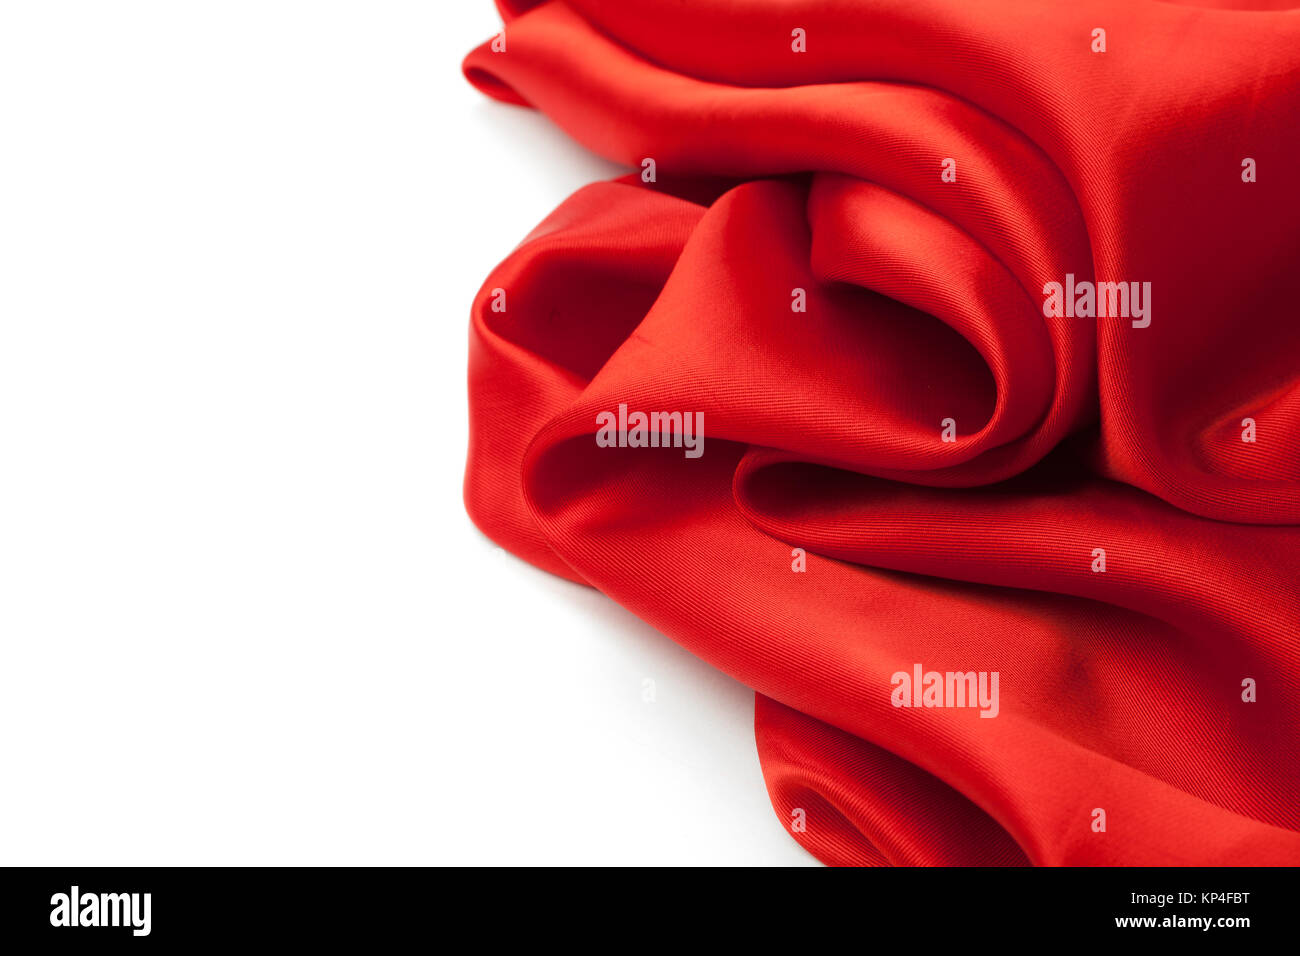 red fabric on a white background. studio shot Stock Photo